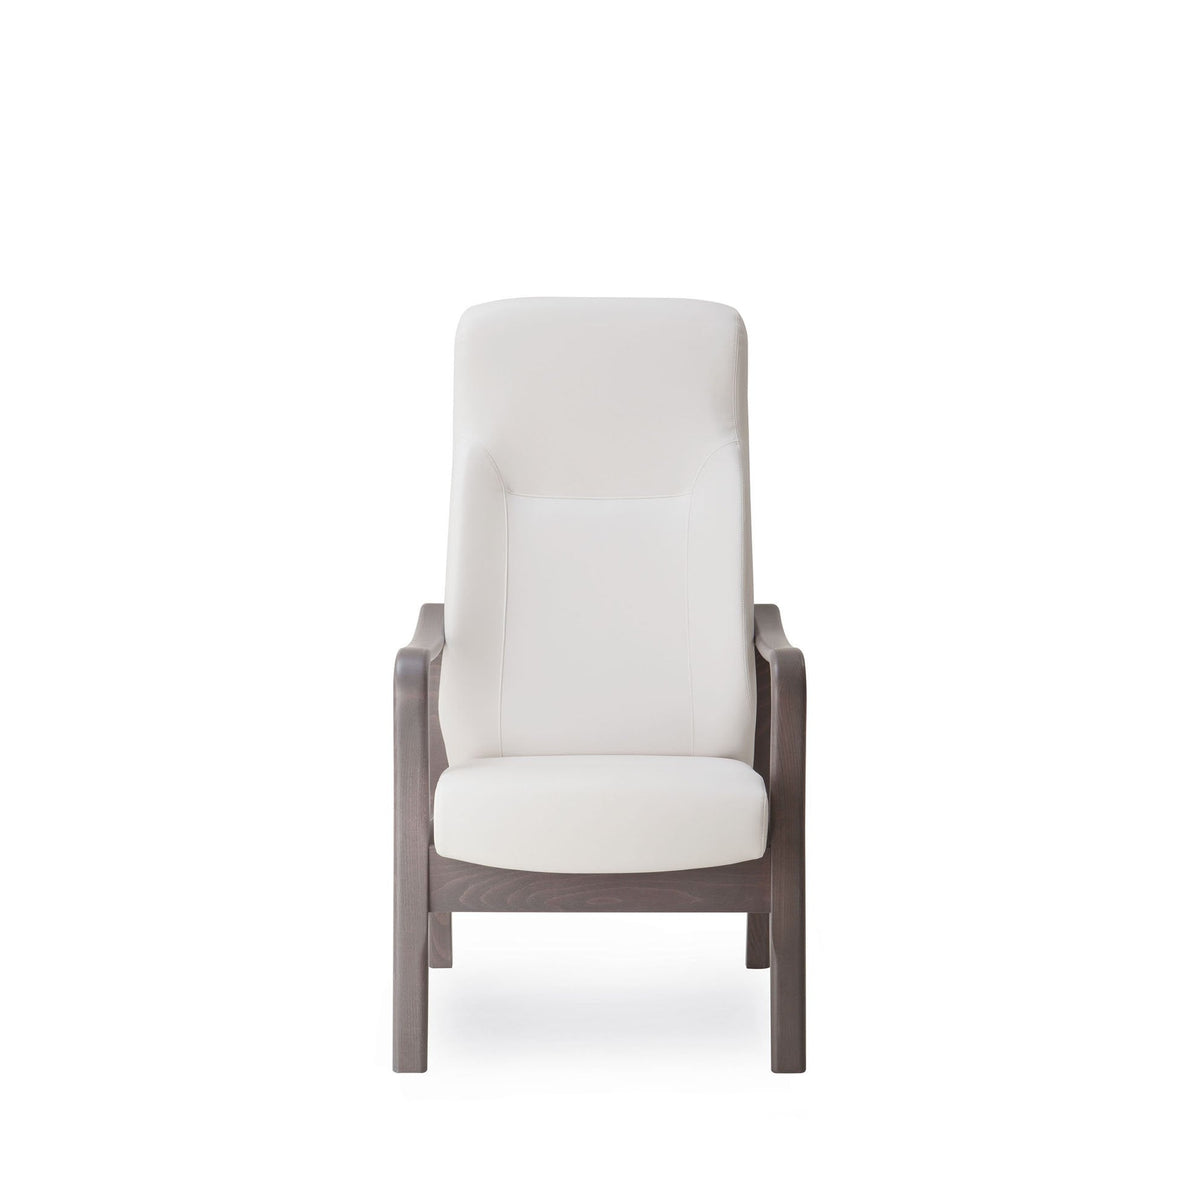 Relax Elegance 16-62/1RG Lounge Chair-Piaval-Contract Furniture Store